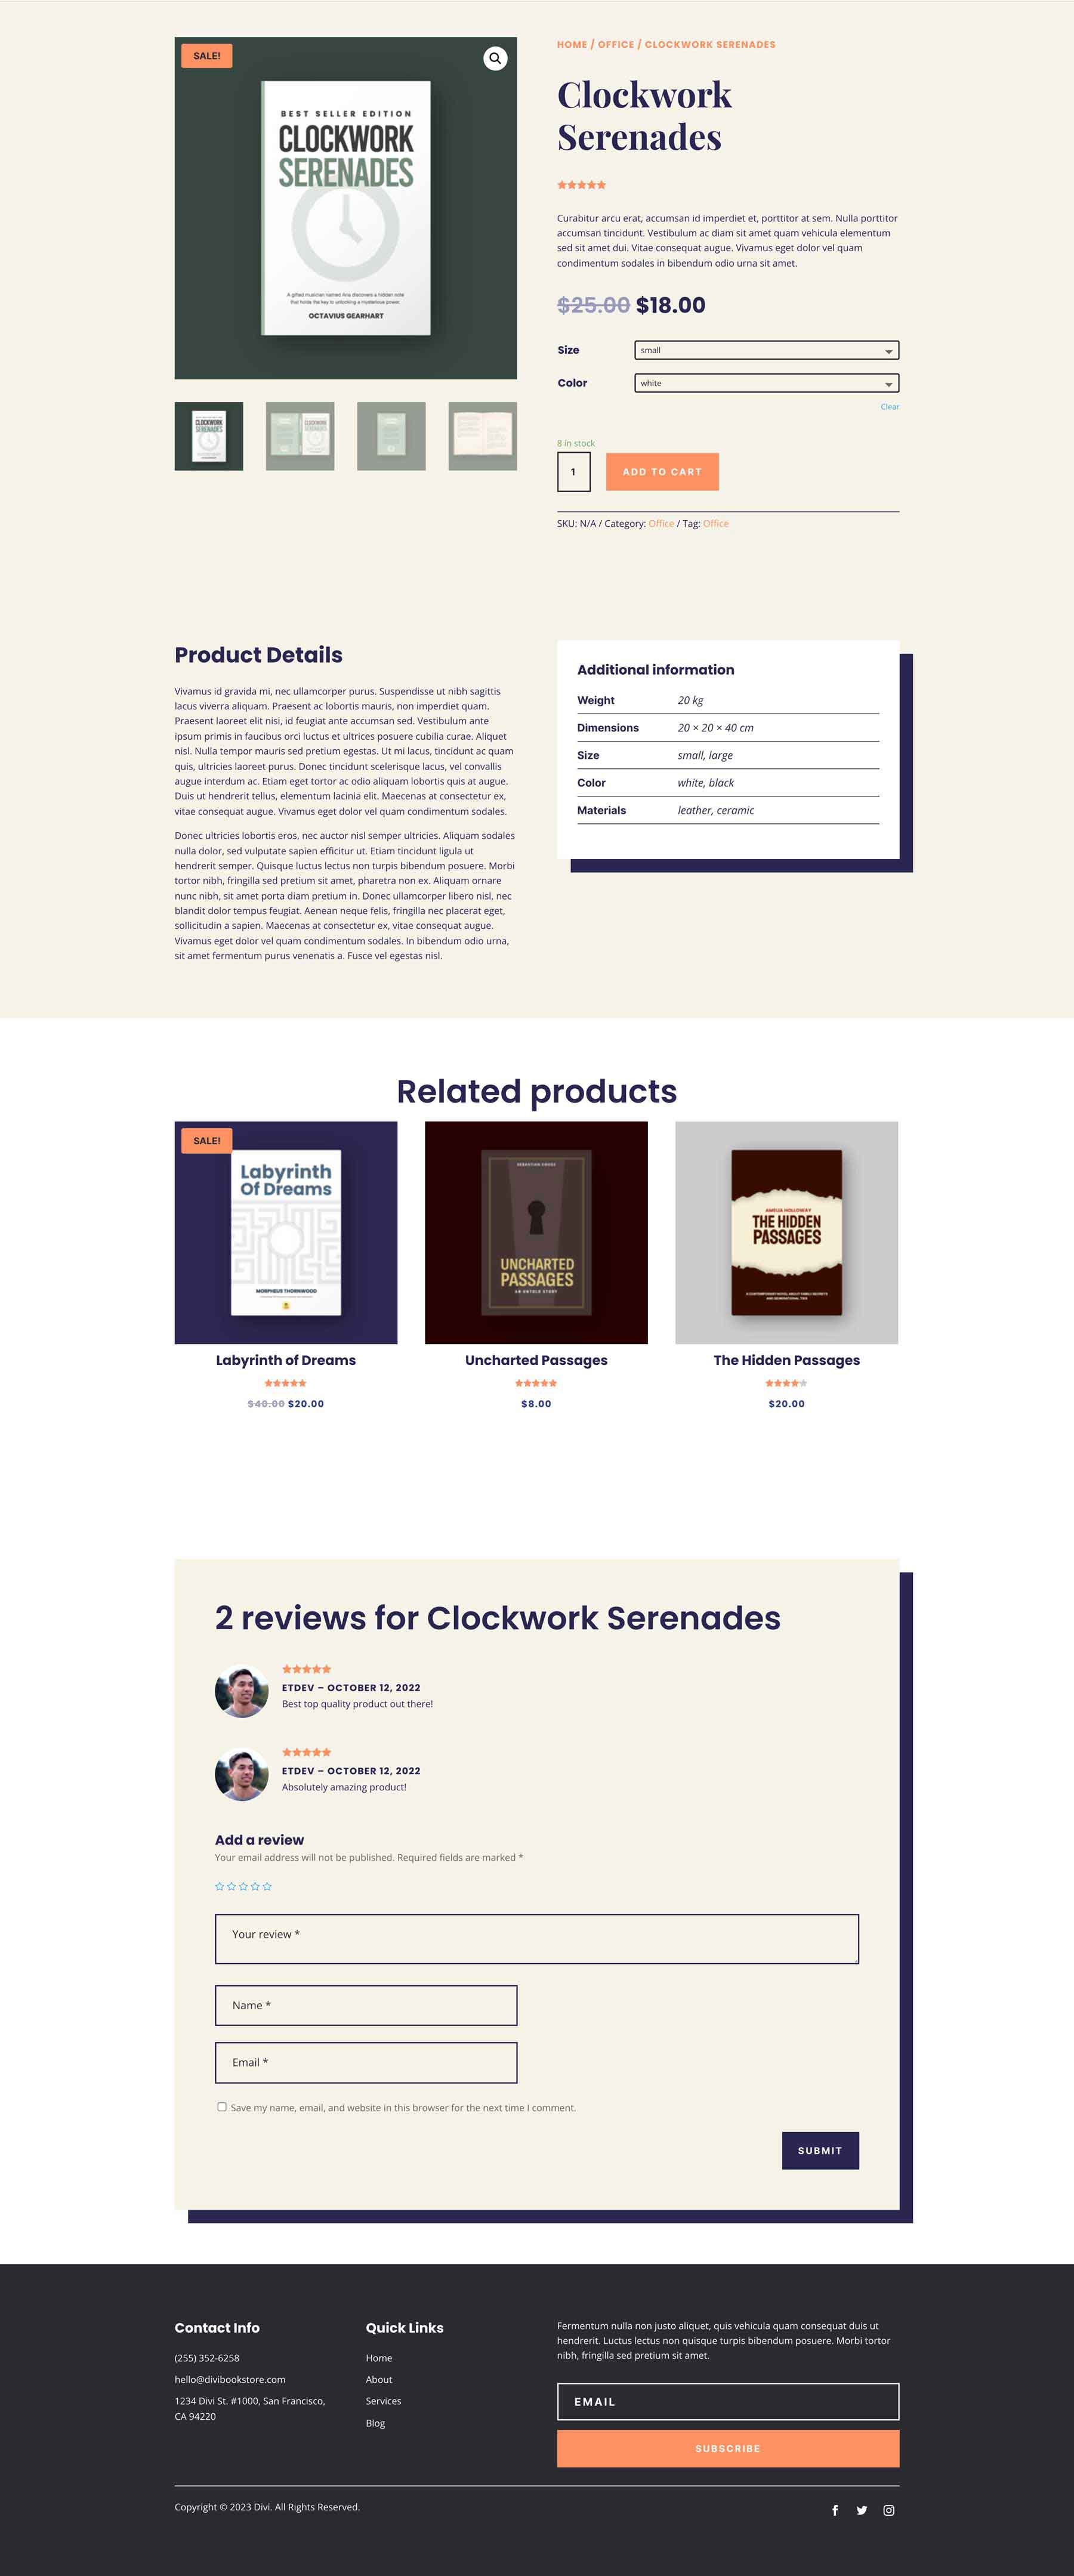 Book Store Layout Pack for Divi